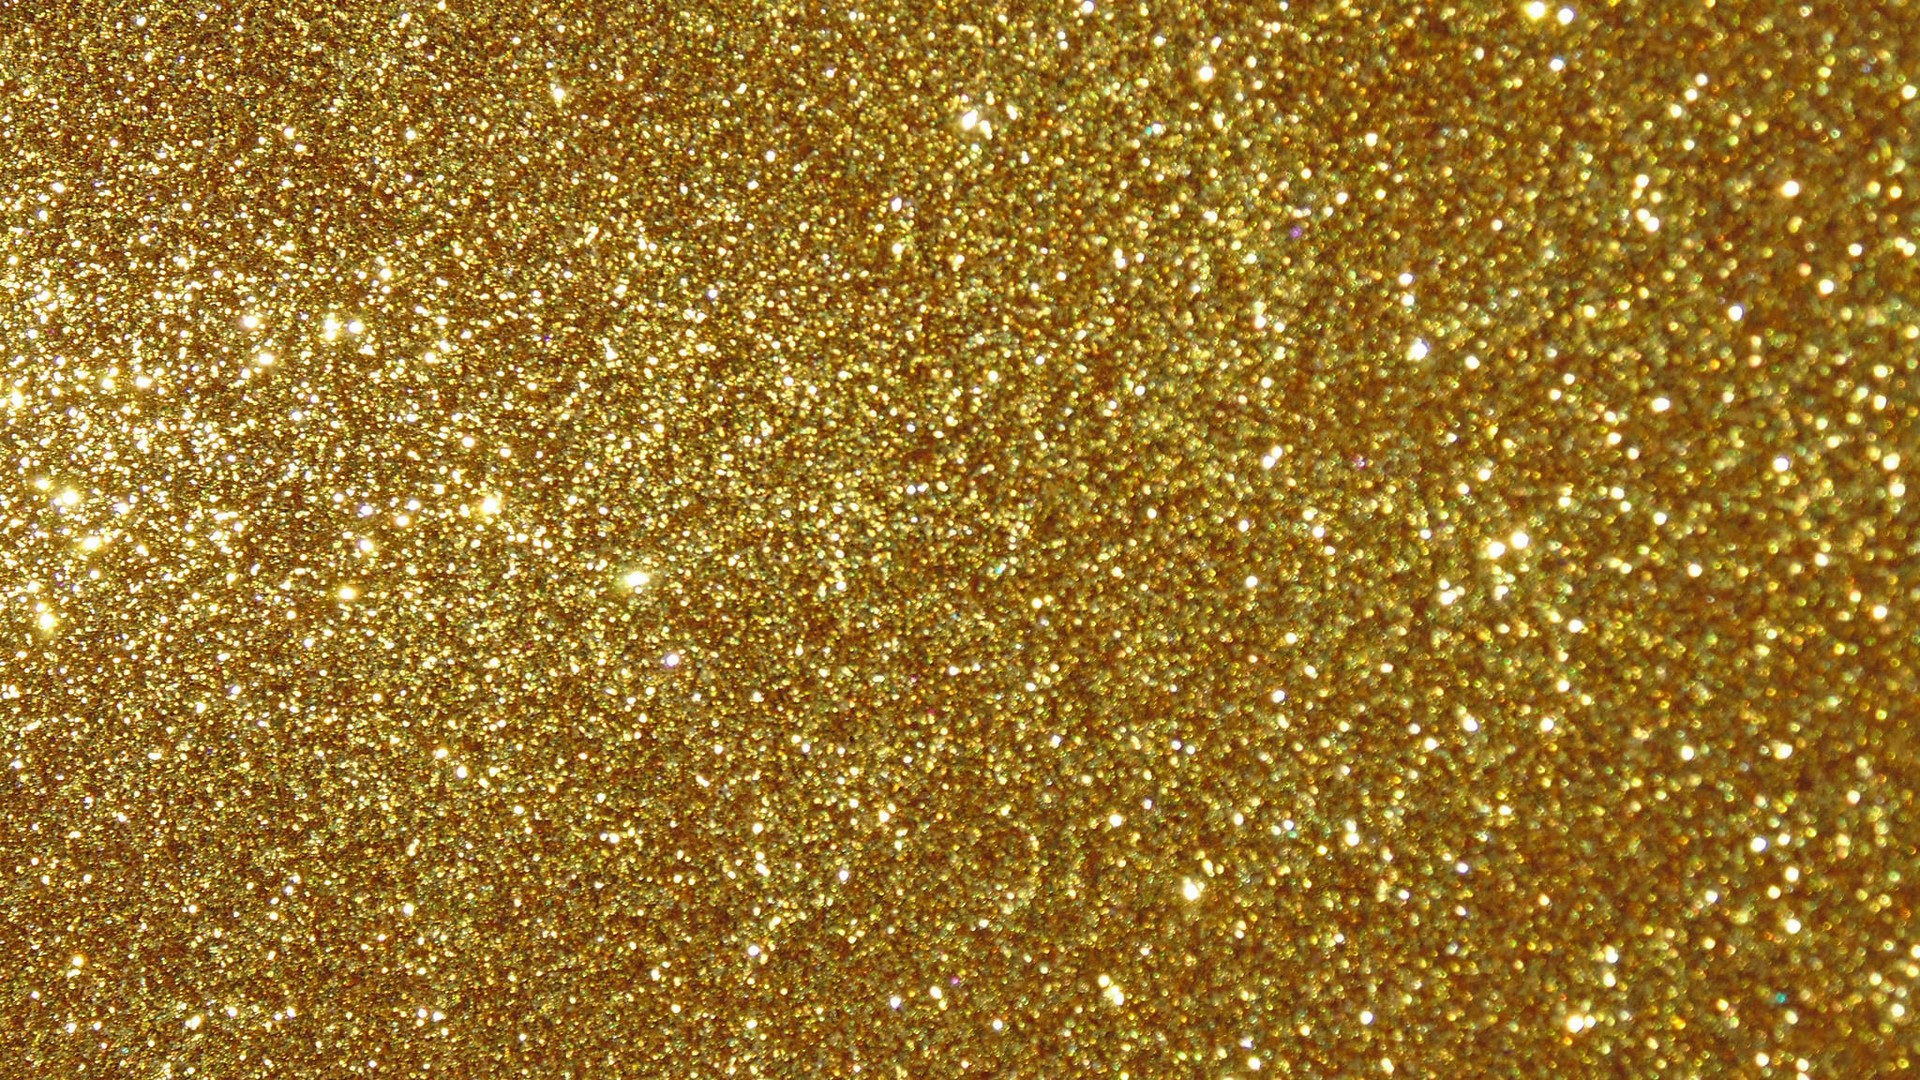 Gold Glitter Desktop Backgrounds With Resolution 1920X1080